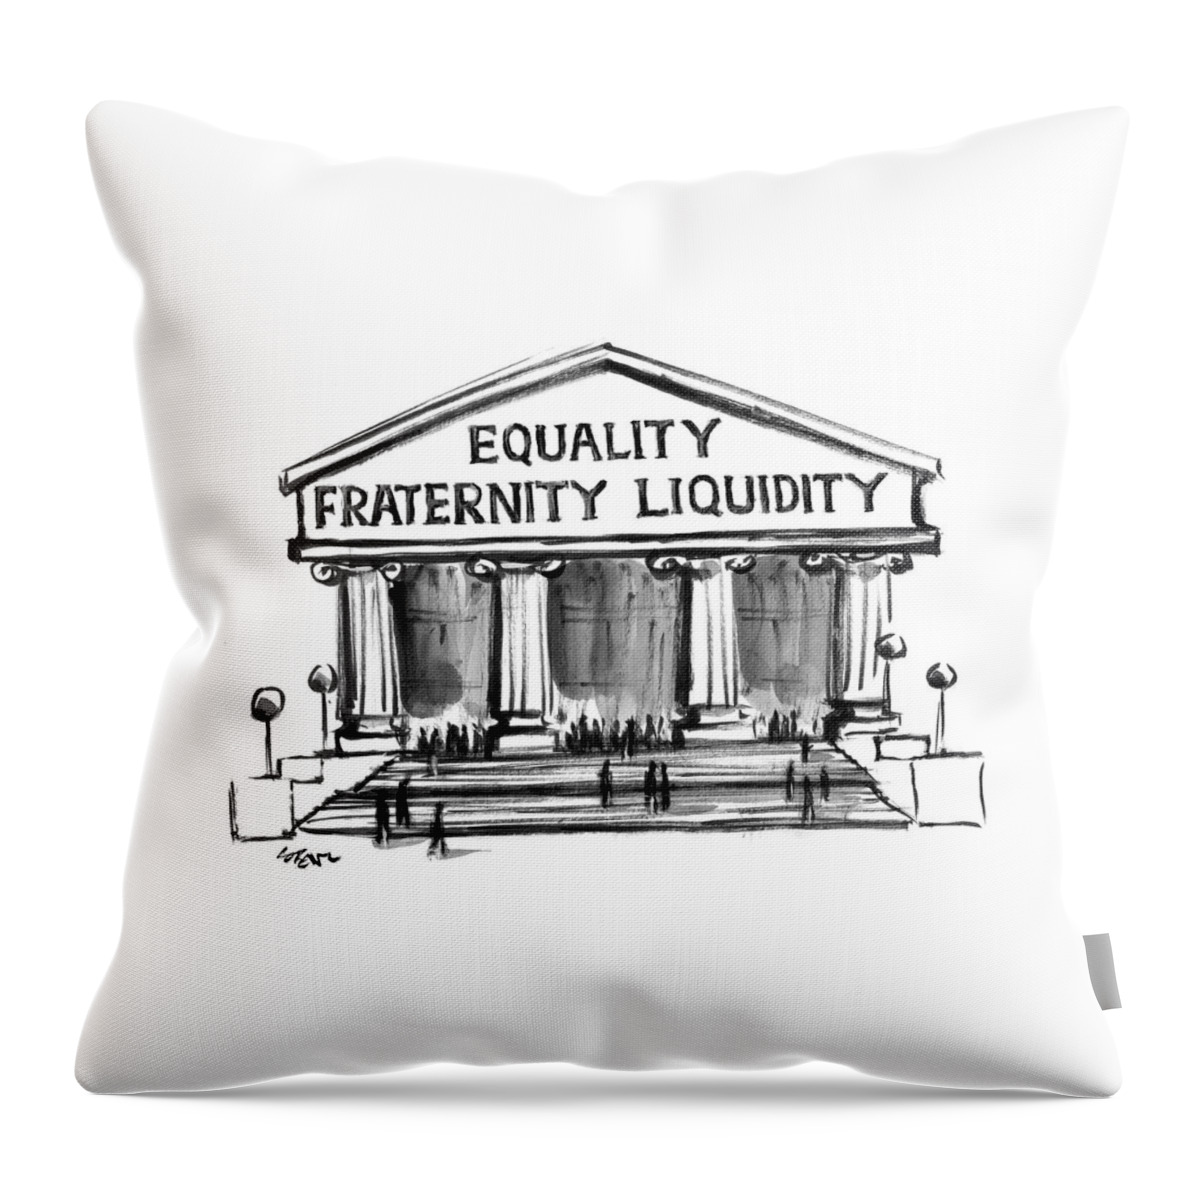 Equality, Fraternity, Liquidity Throw Pillow